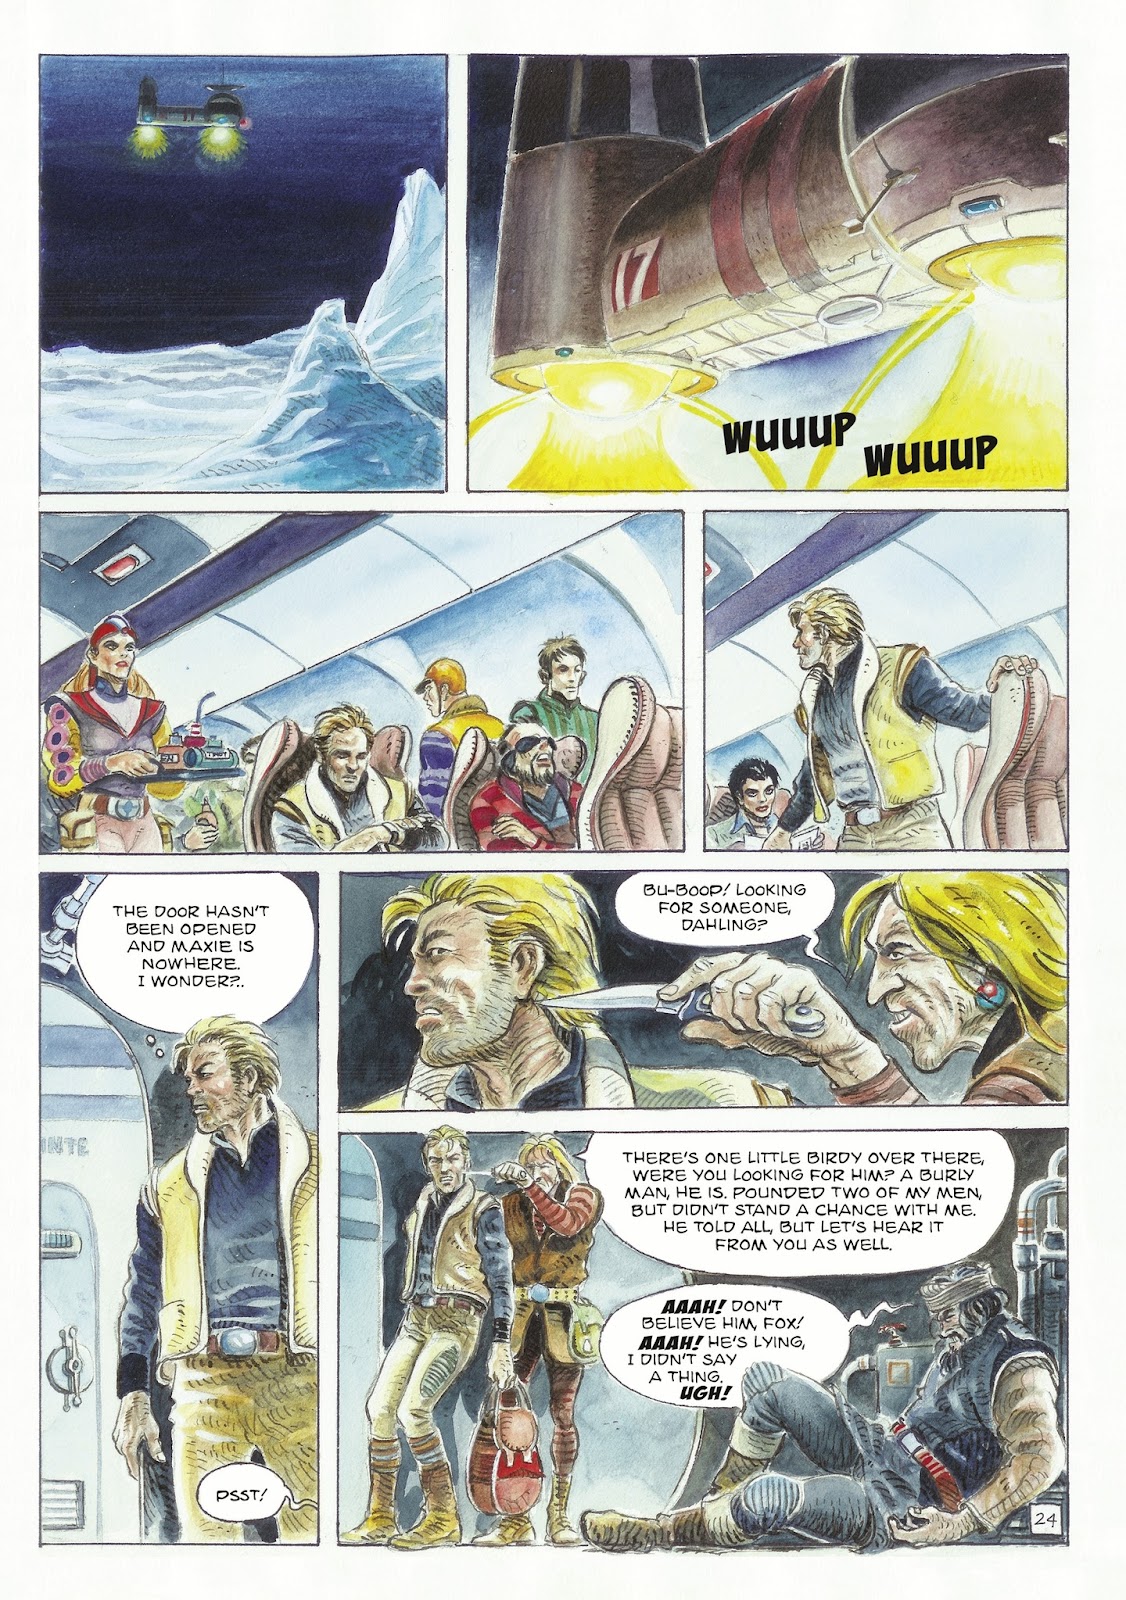 The Man With the Bear issue 1 - Page 26